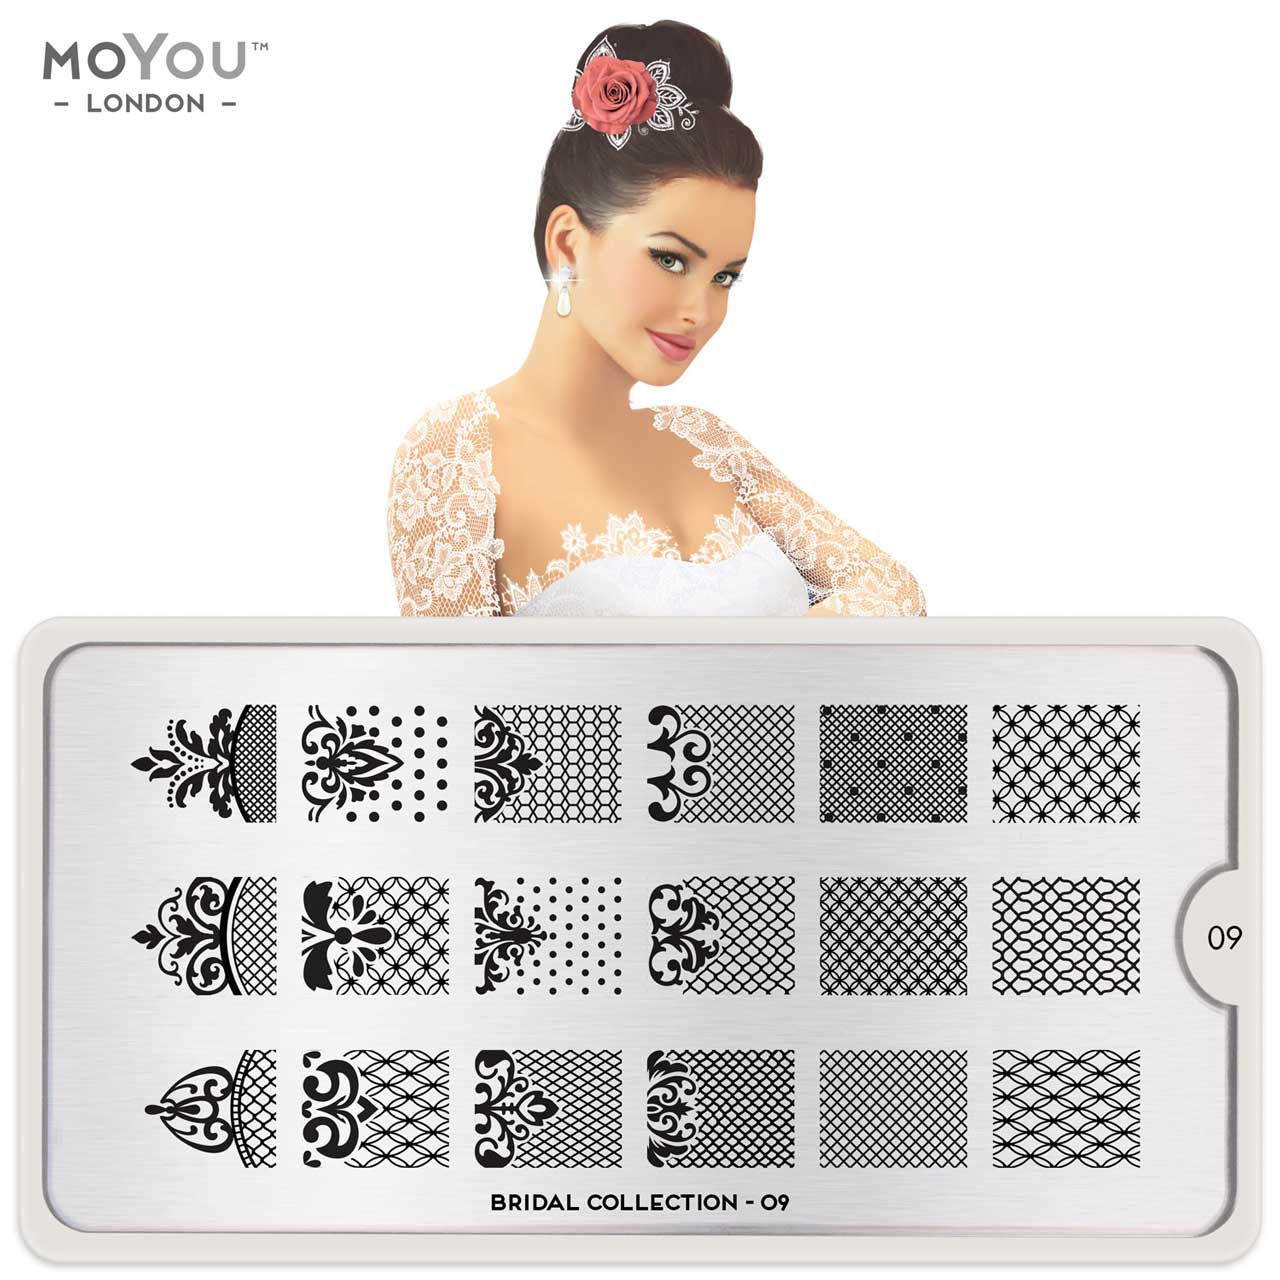 MoYou Stamping Plate Bridal 09